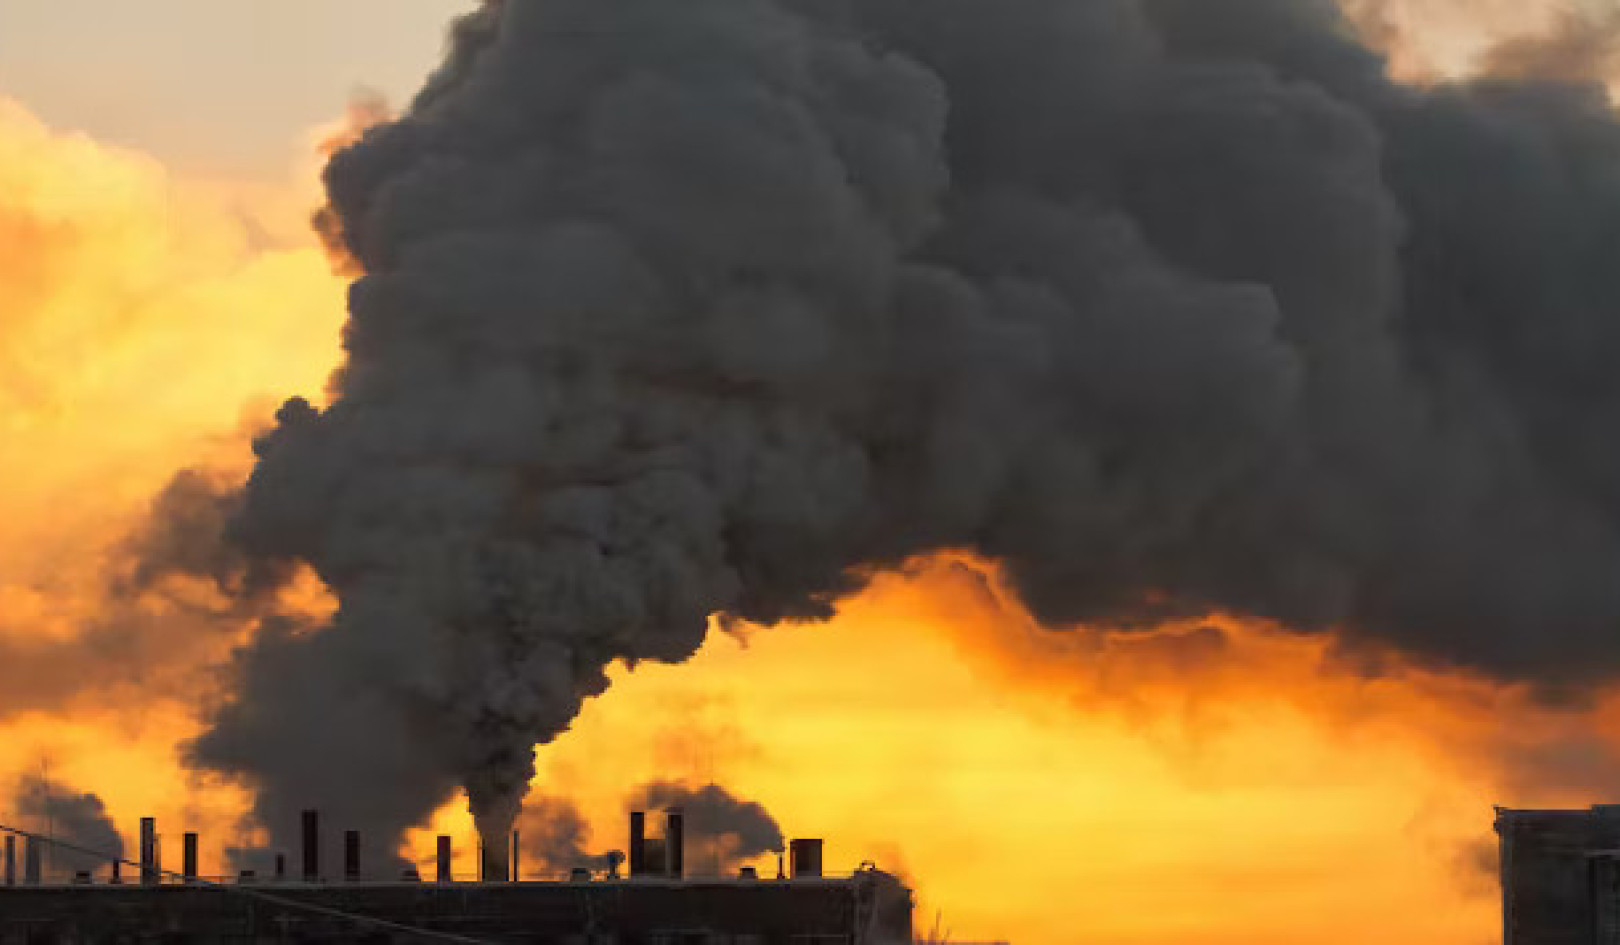 The UN Emissions Gap Report: Are We on Track to Curb Climate Change?